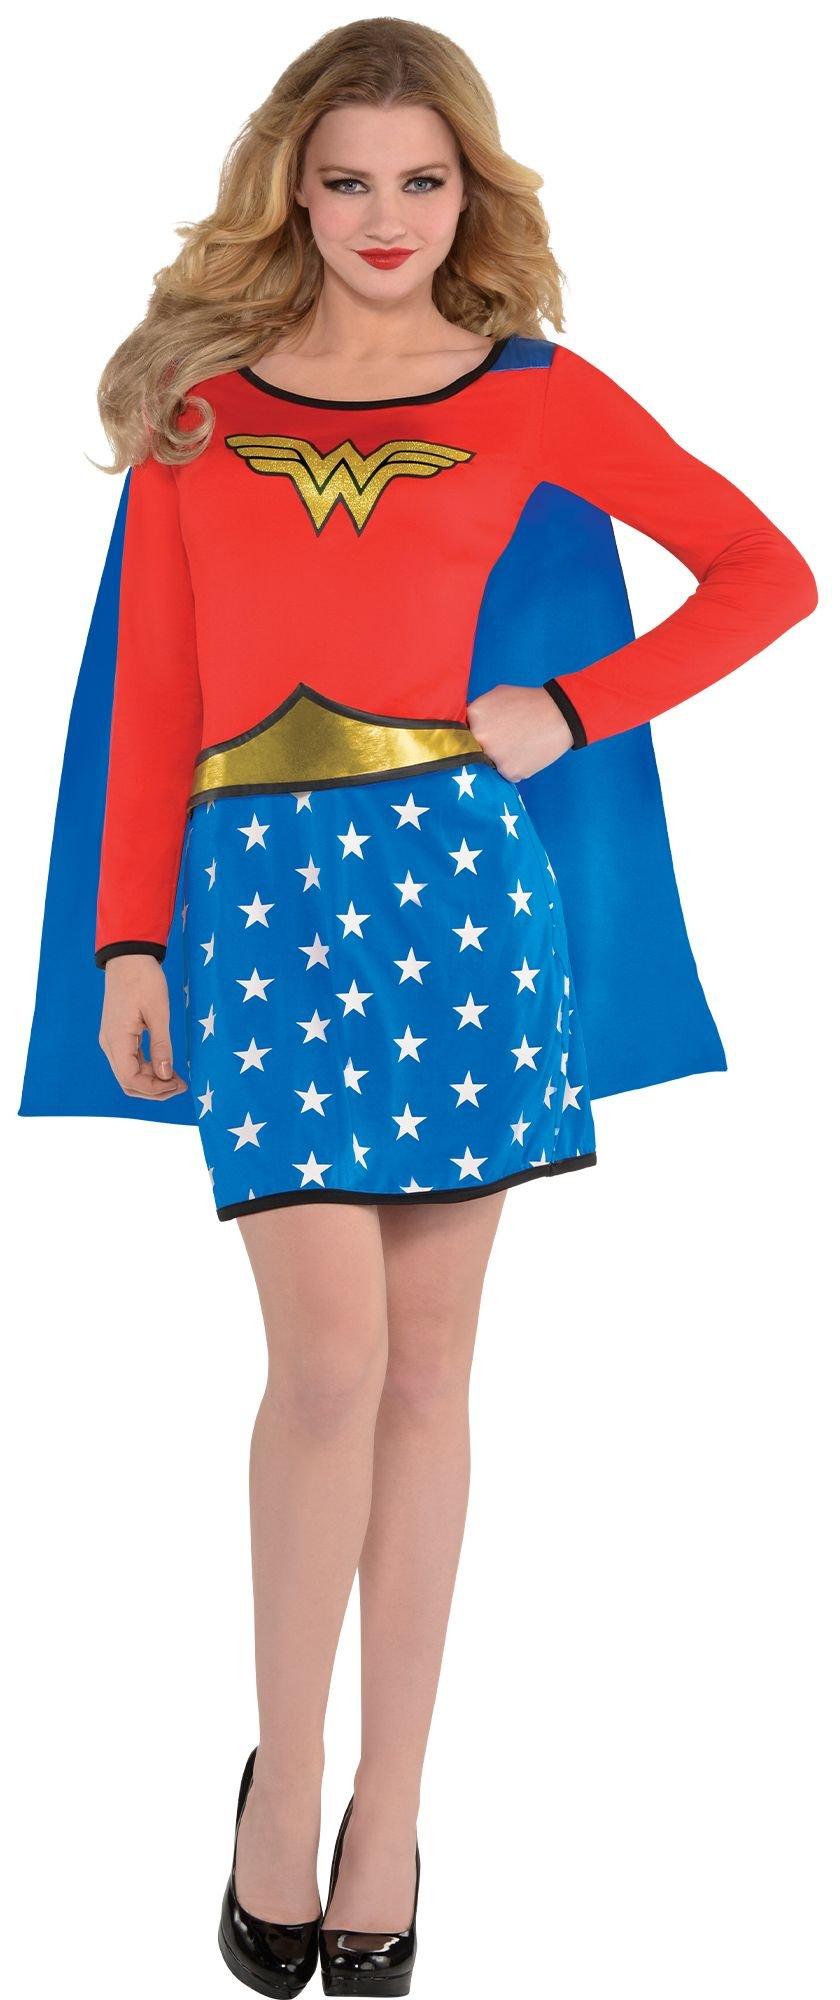 Adult Long-Sleeve Wonder Woman Dress with Cape